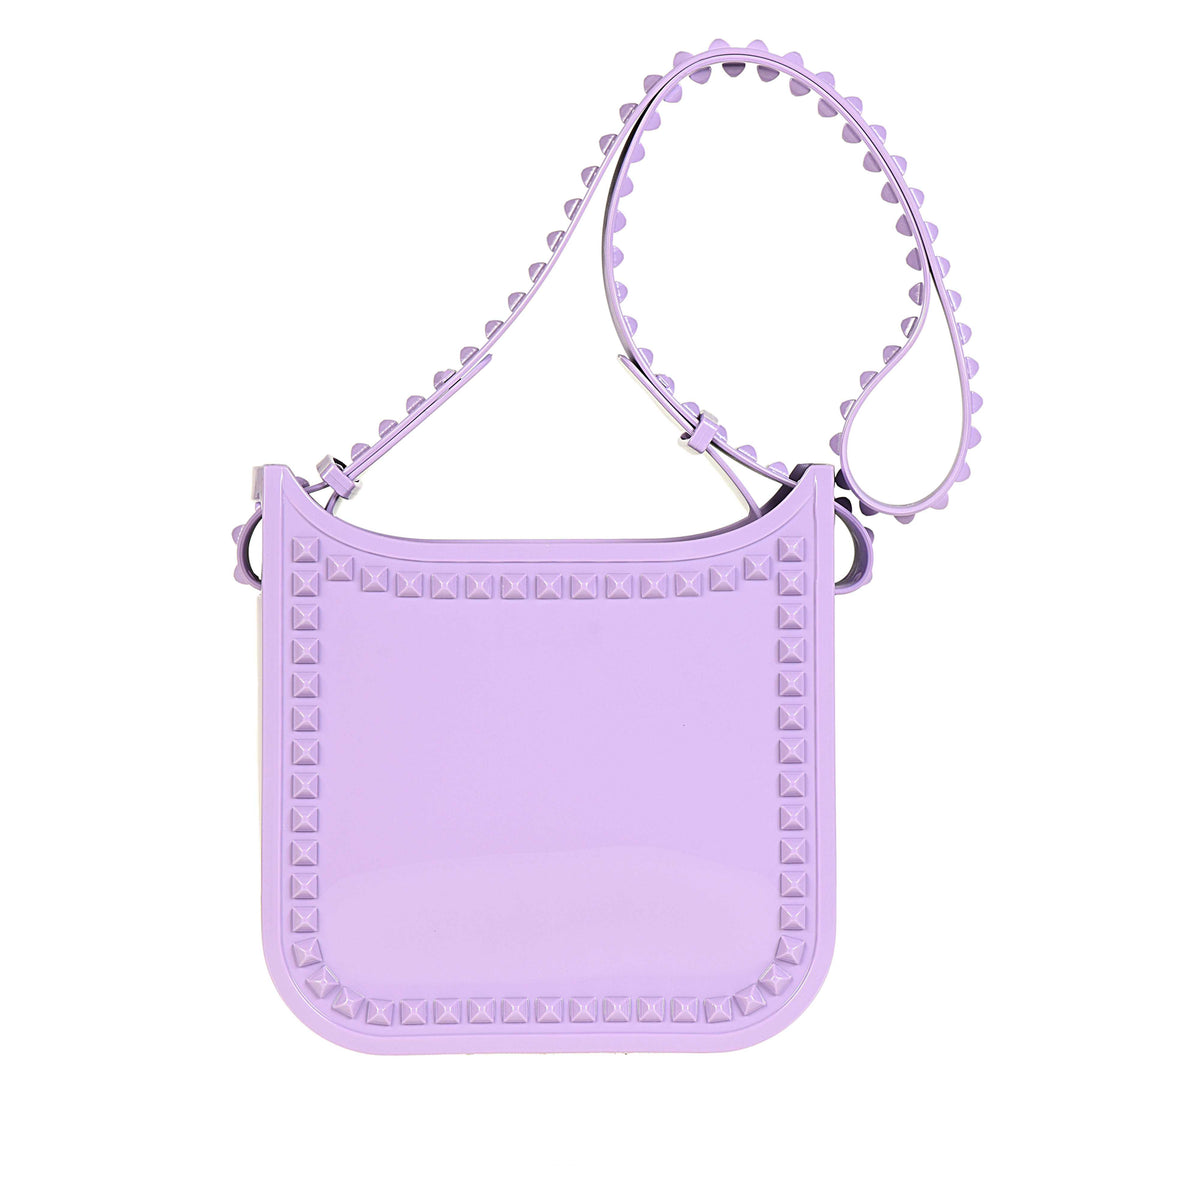 Rose scented Carmen Sol Toni jelly bags in color violet